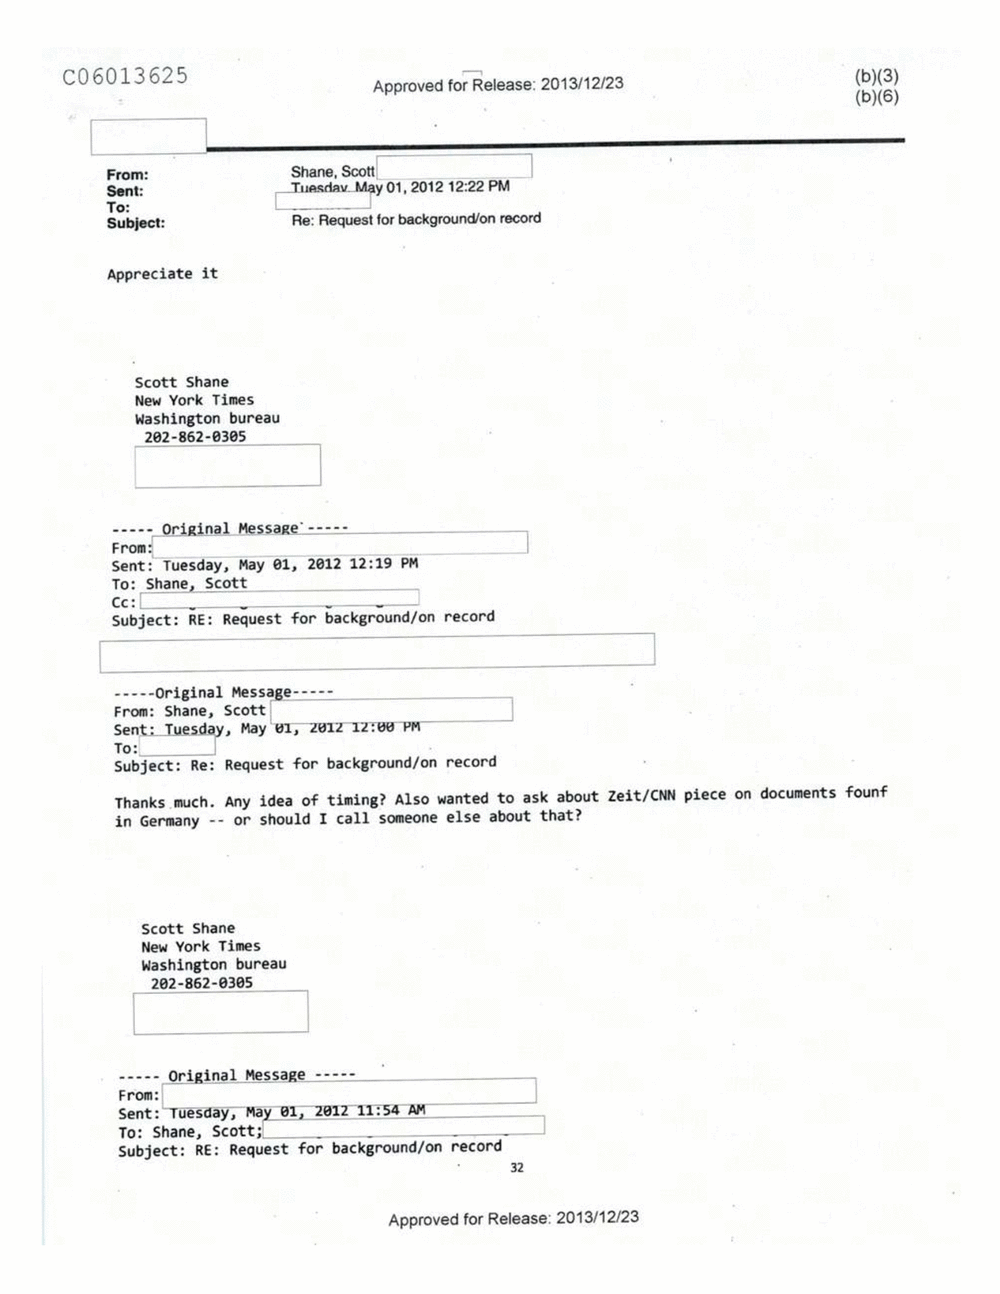 Page 460 from Email Correspondence Between Reporters and CIA Flacks